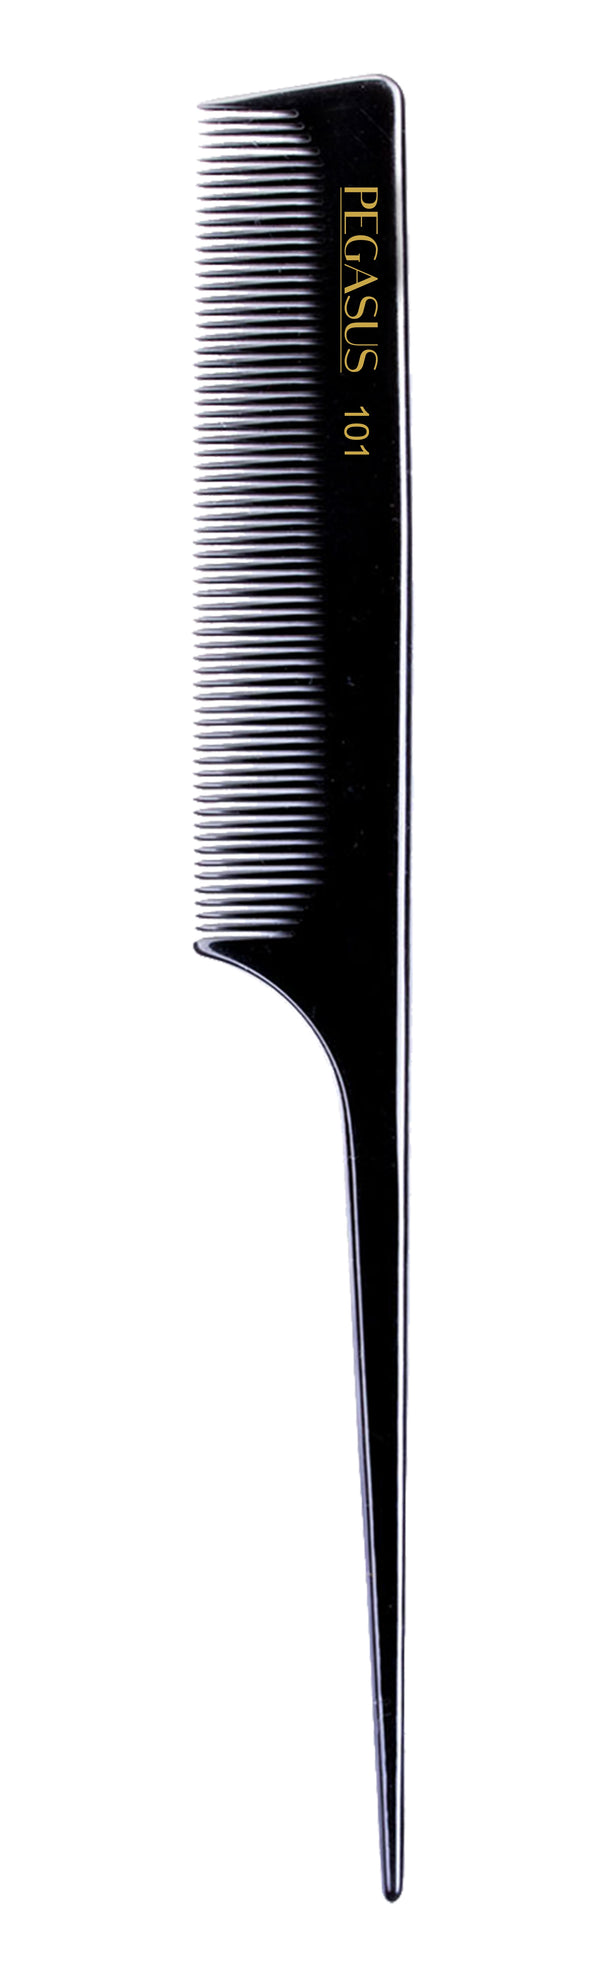 Pegasus Hard Rubber Comb 101 - 8" Rat Tail with Fine Teeth